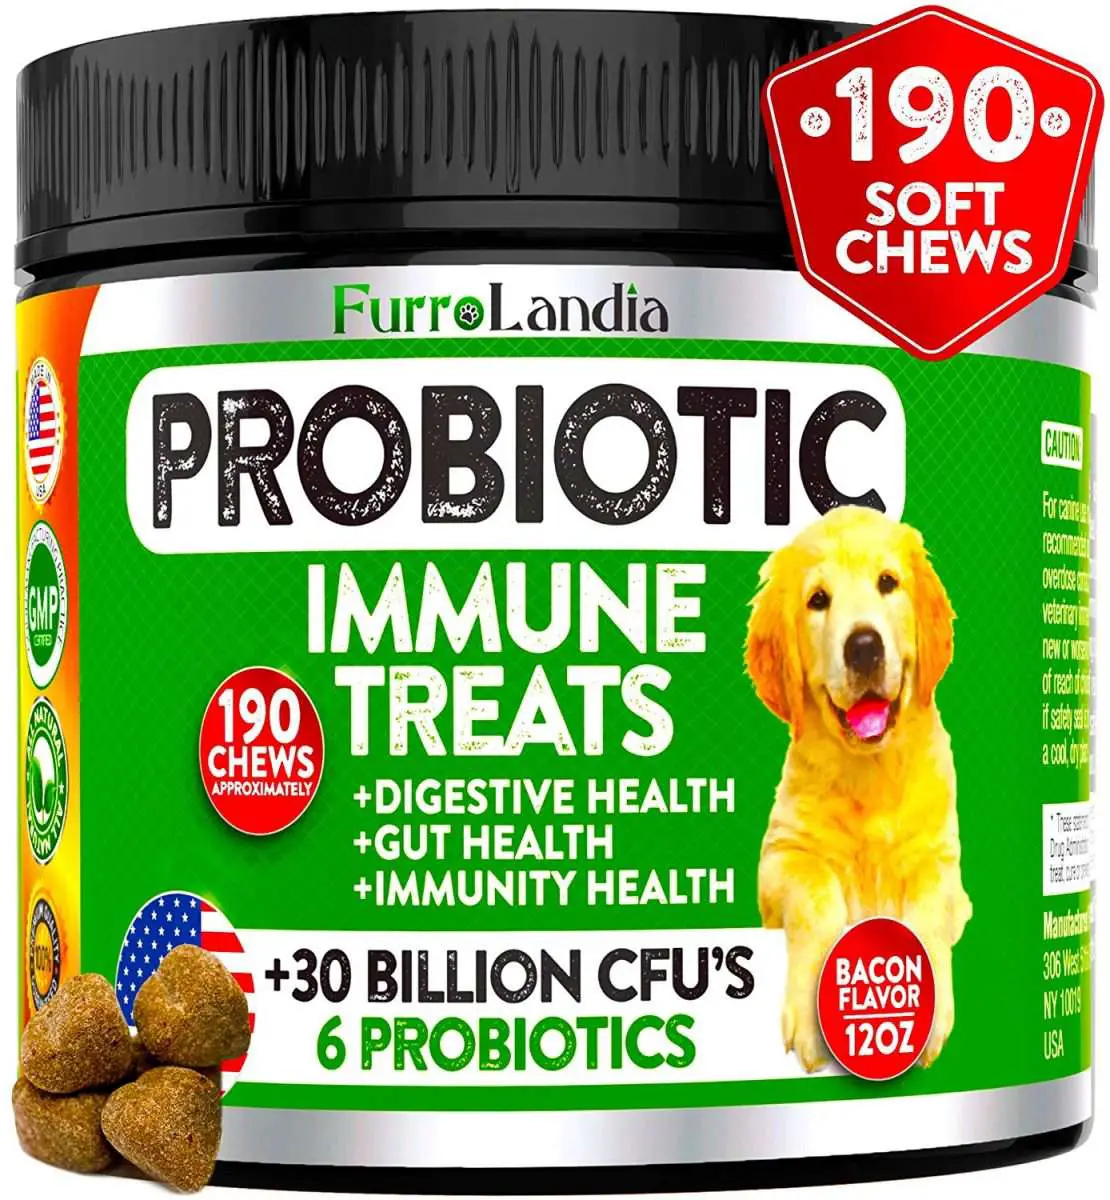 4 All Natural Probiotics for Dogs we Love in 2020